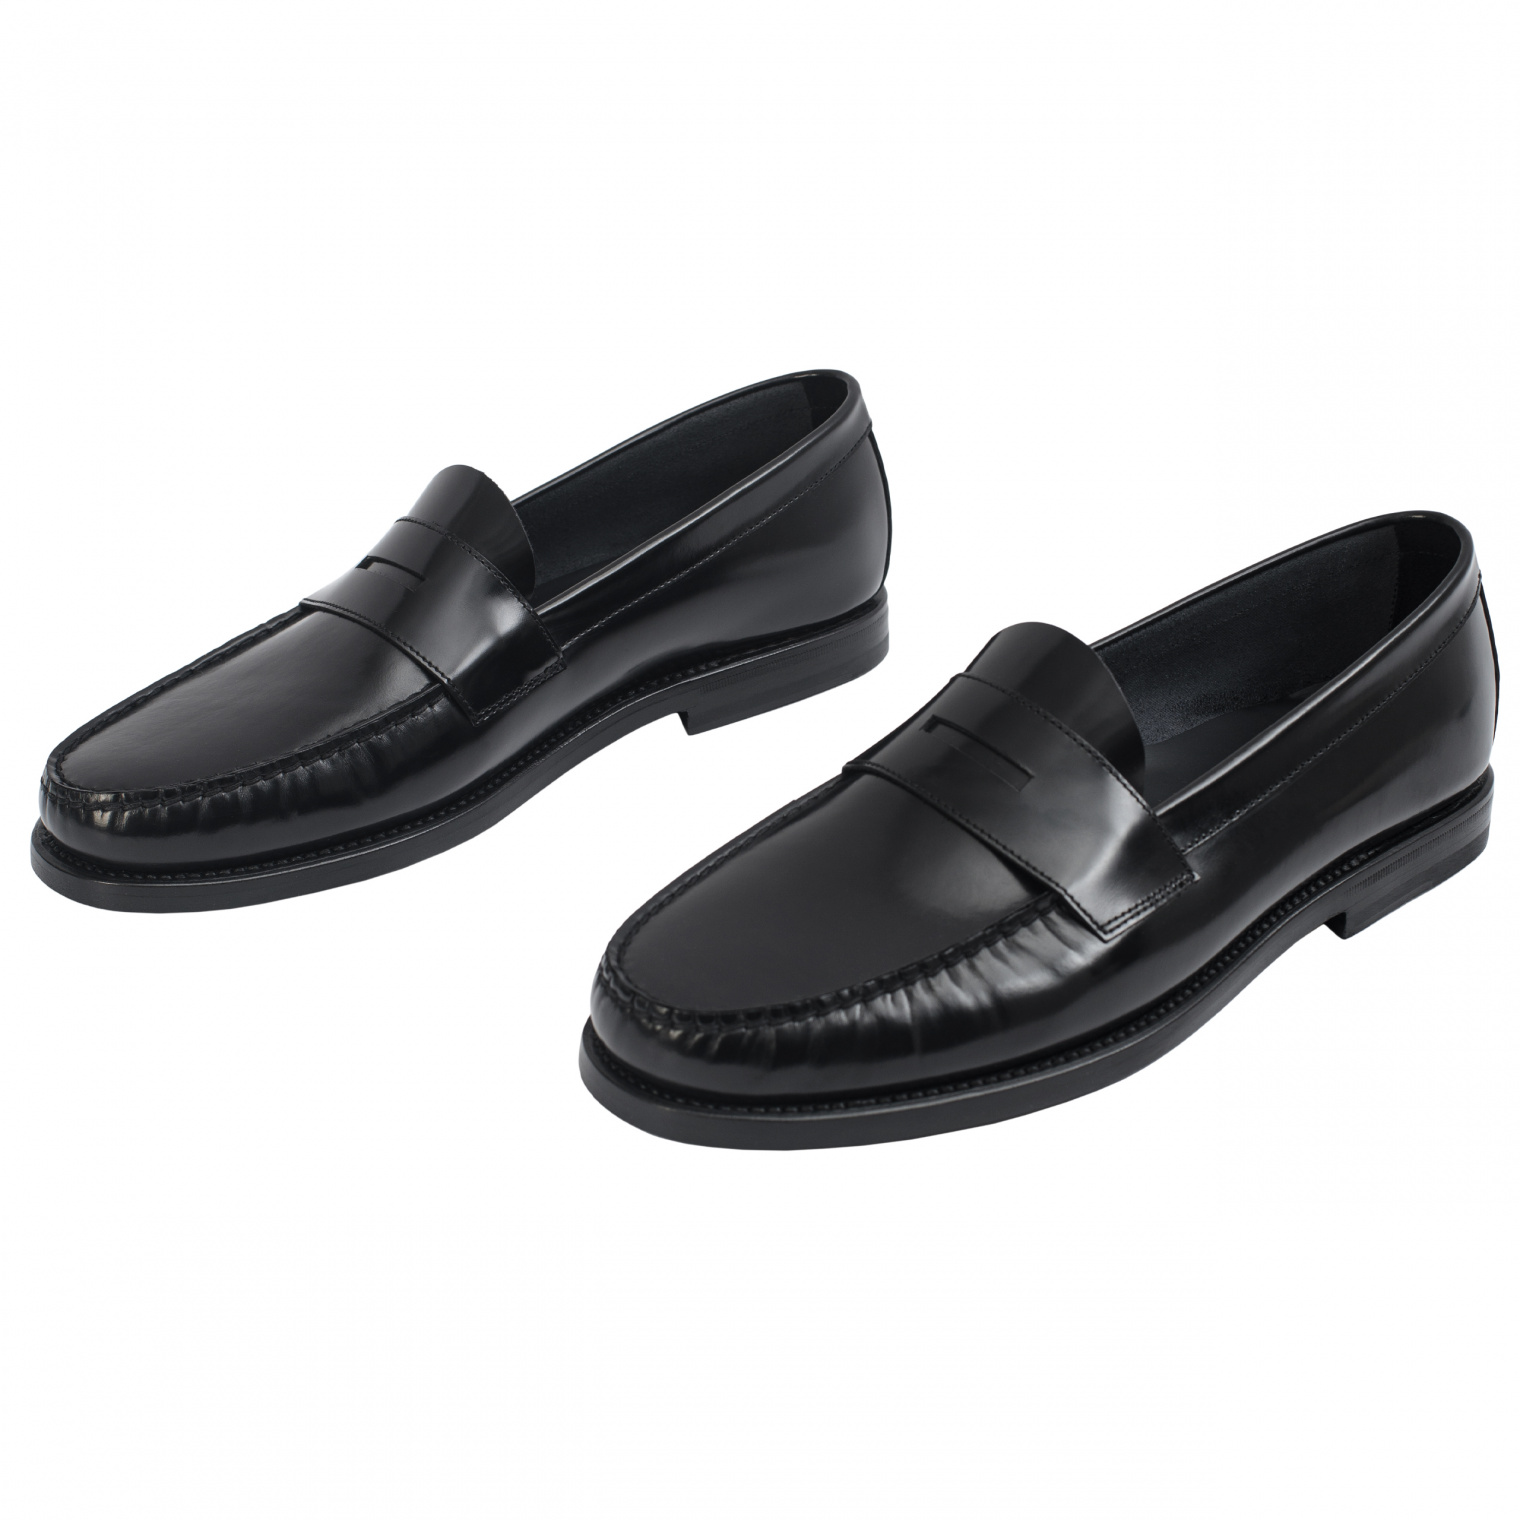 Buy Fear of God men leather penny loafers in black for $695 online